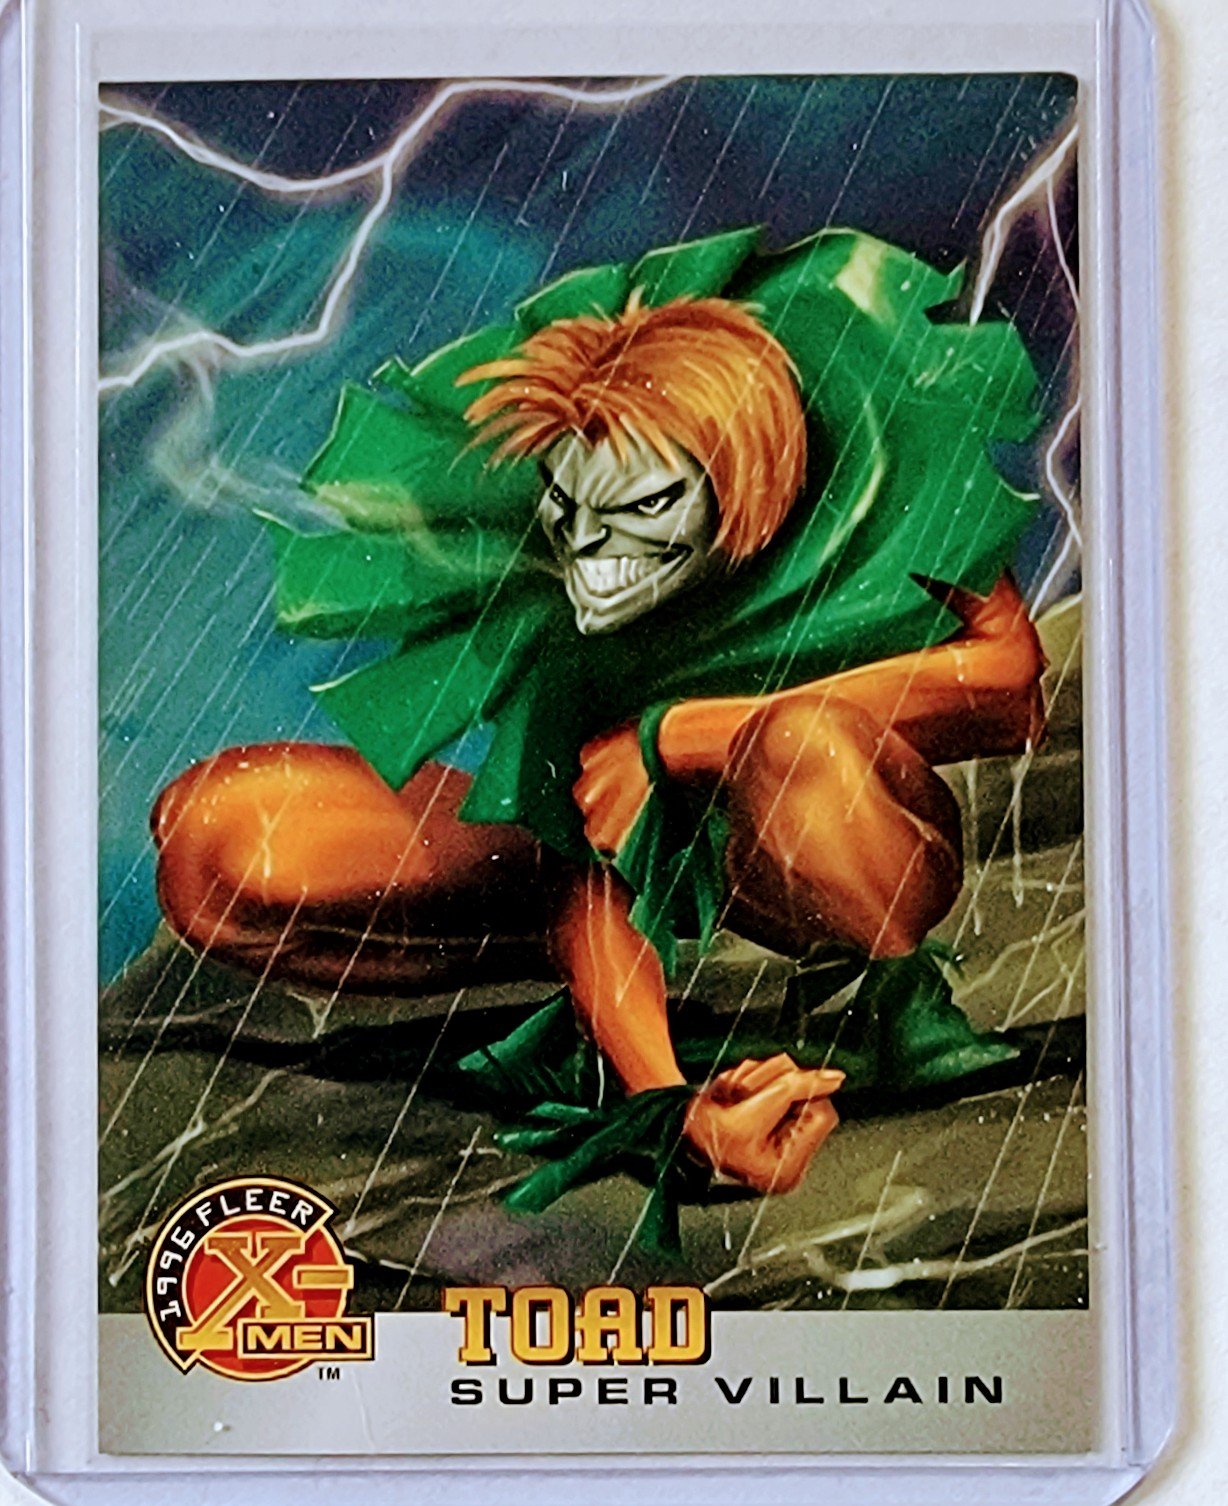 1996 Fleer X-Men Toad Super Villain Marvel Trading Card VG AVM1 simple Xclusive Collectibles   